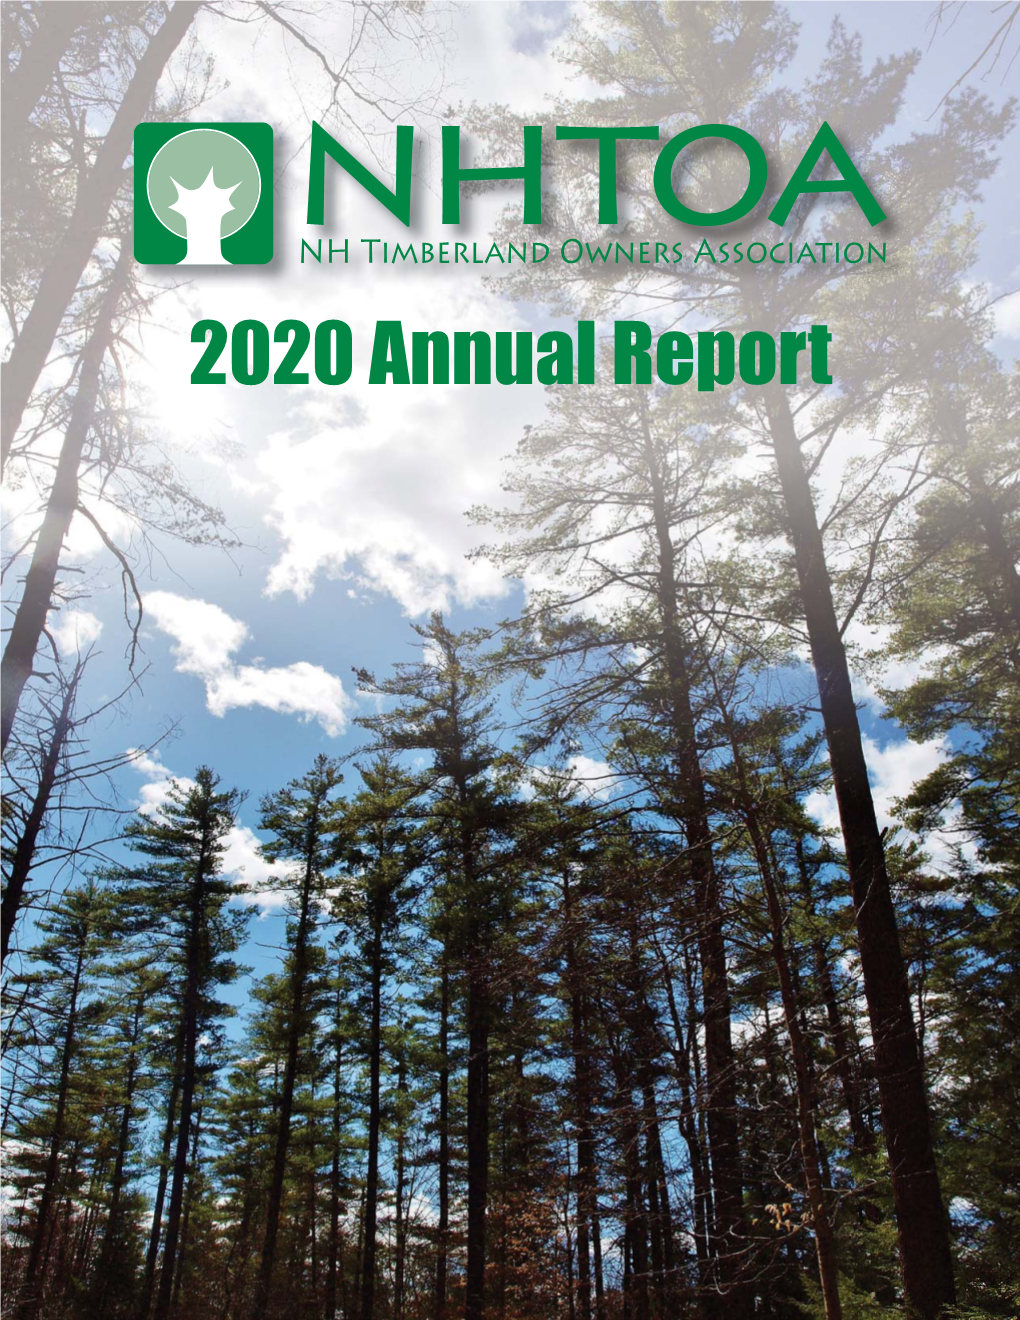 2020 Annual Report About the Cover